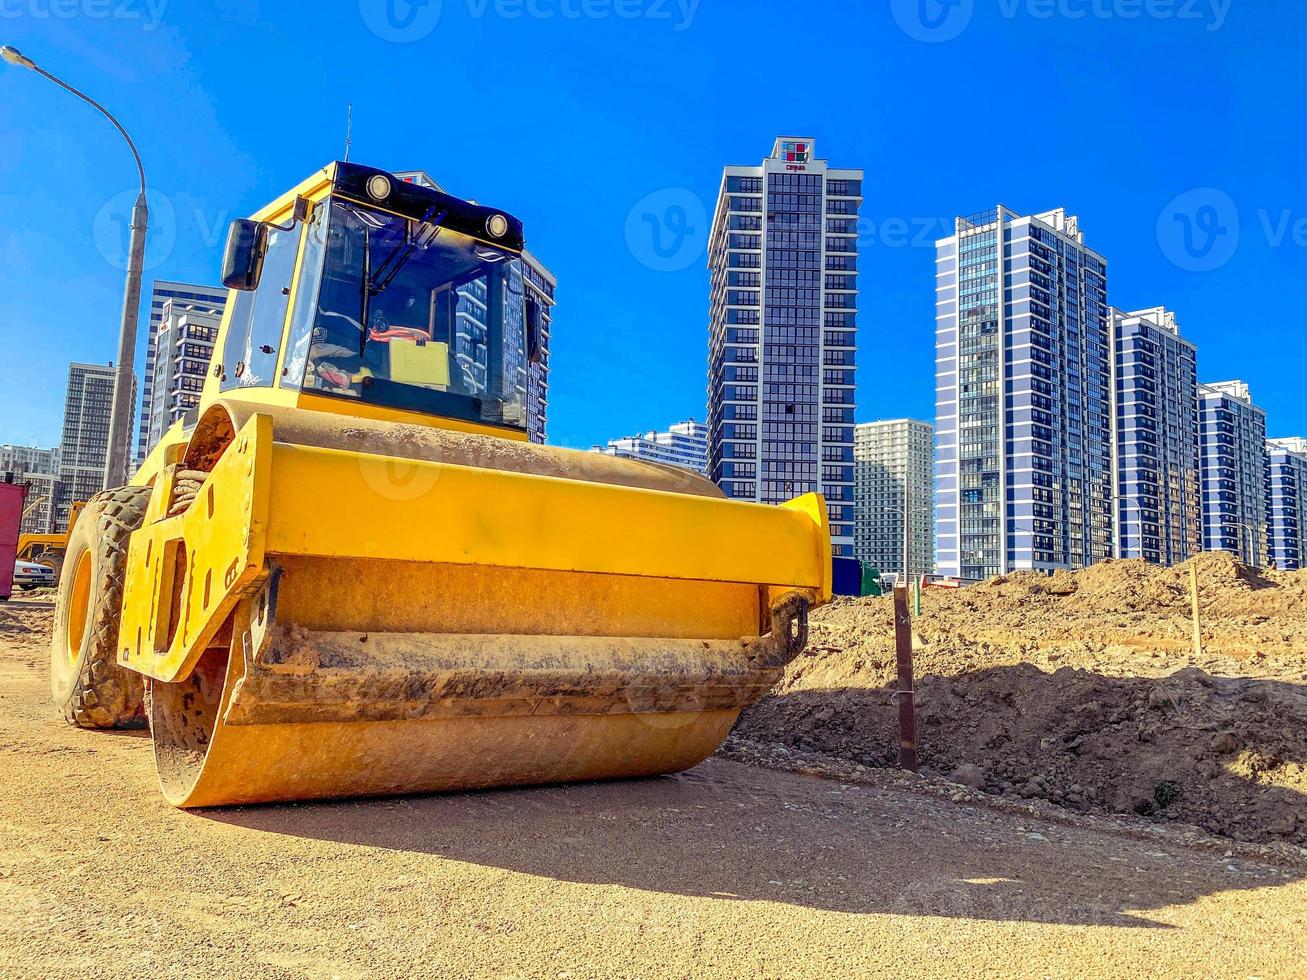 construction of a new microdistrict in the city center. high, multi-storey buildings made of concrete and glass. next to the house yellow excavator for construction photo